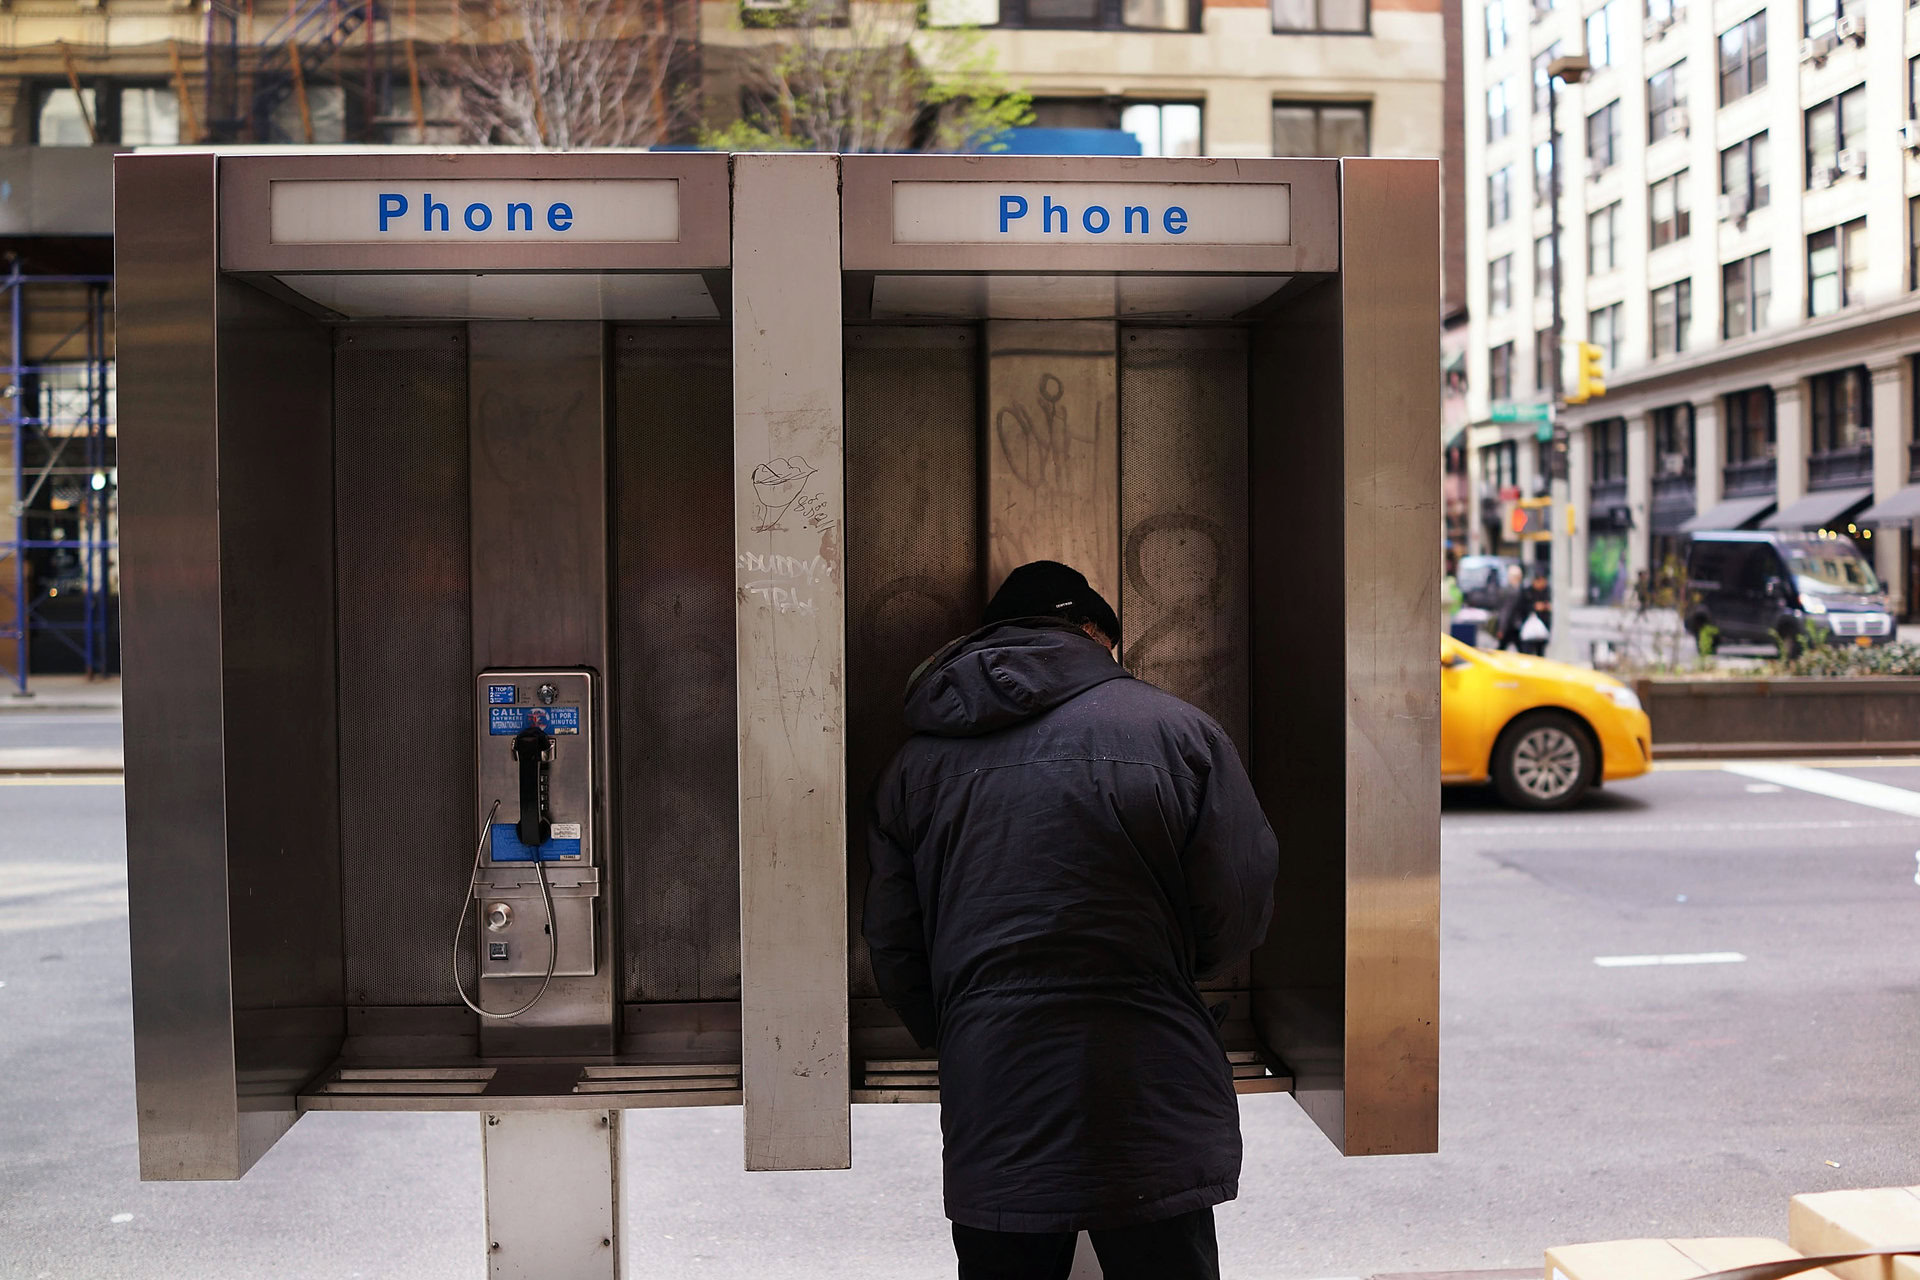 Google joins effort to turn pay phones into WiFi hotspots.